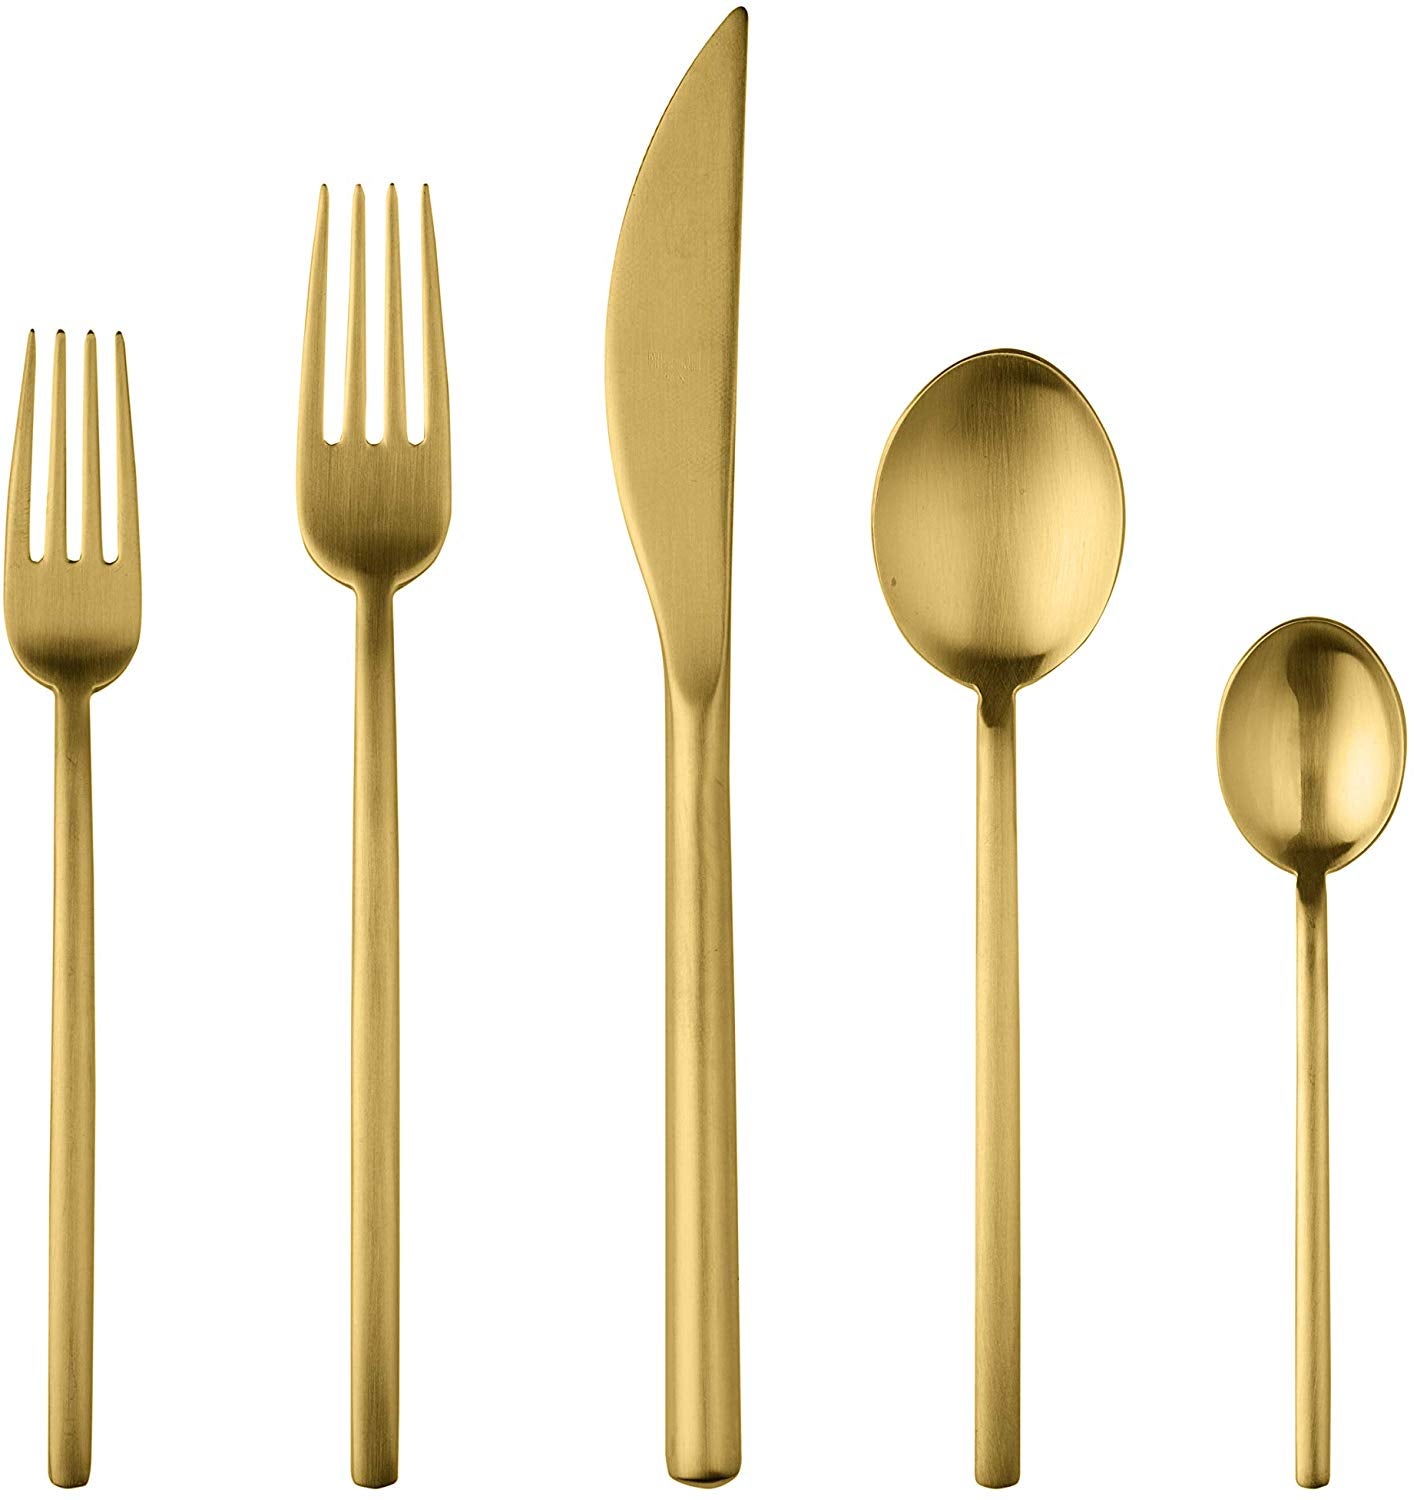 Mepra Due Ice Oro 5 Piece Place Setting, Brushed Gold – 108022005